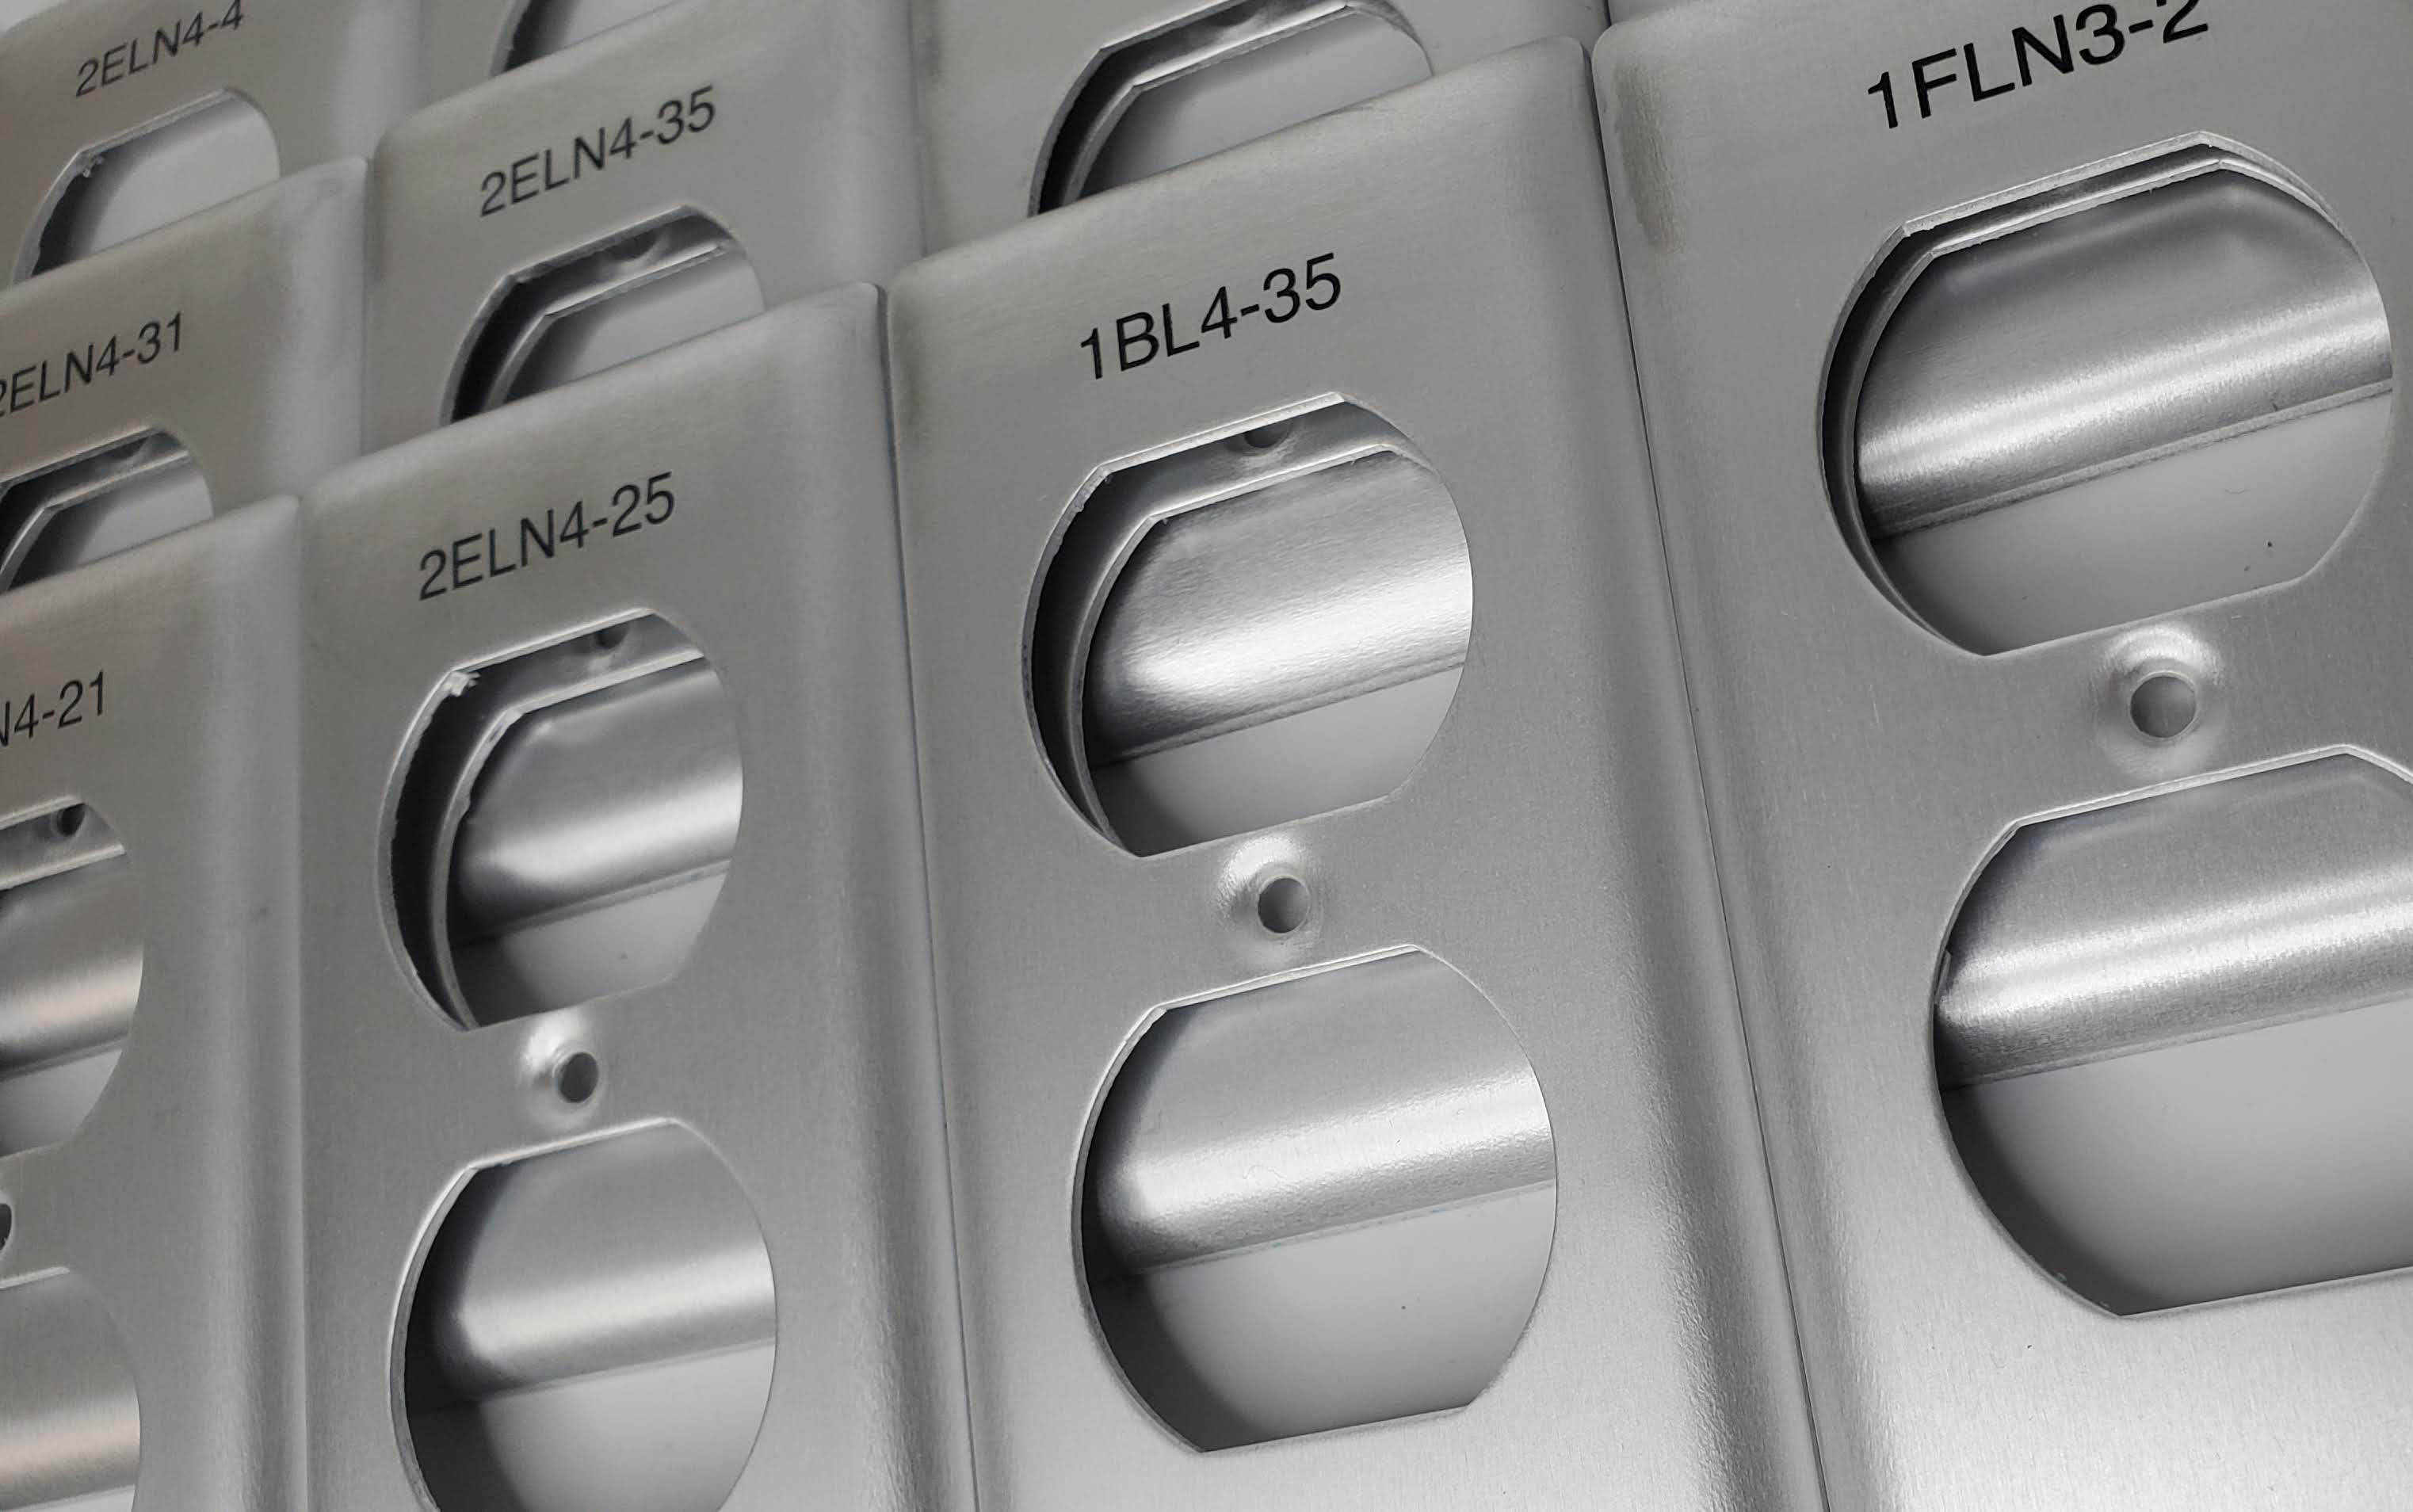 Switch Plate Engraving for Hospitals And Medical Facilities